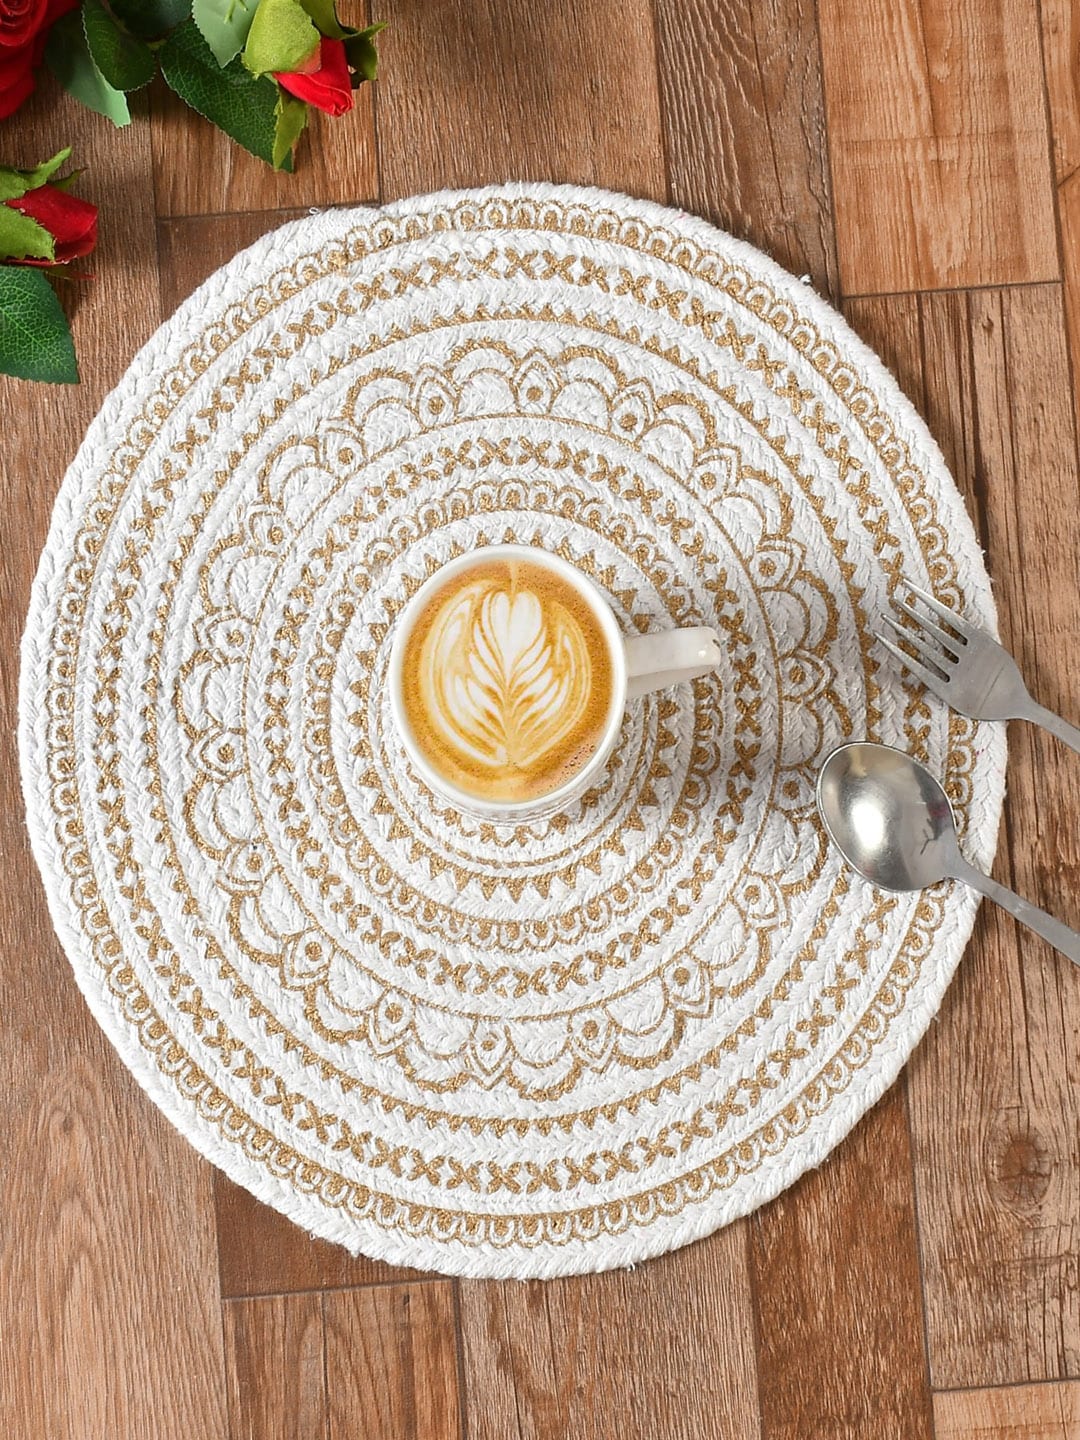 Homefab India Set Of 6 Golden Printed Cotton  Table Placemats Price in India